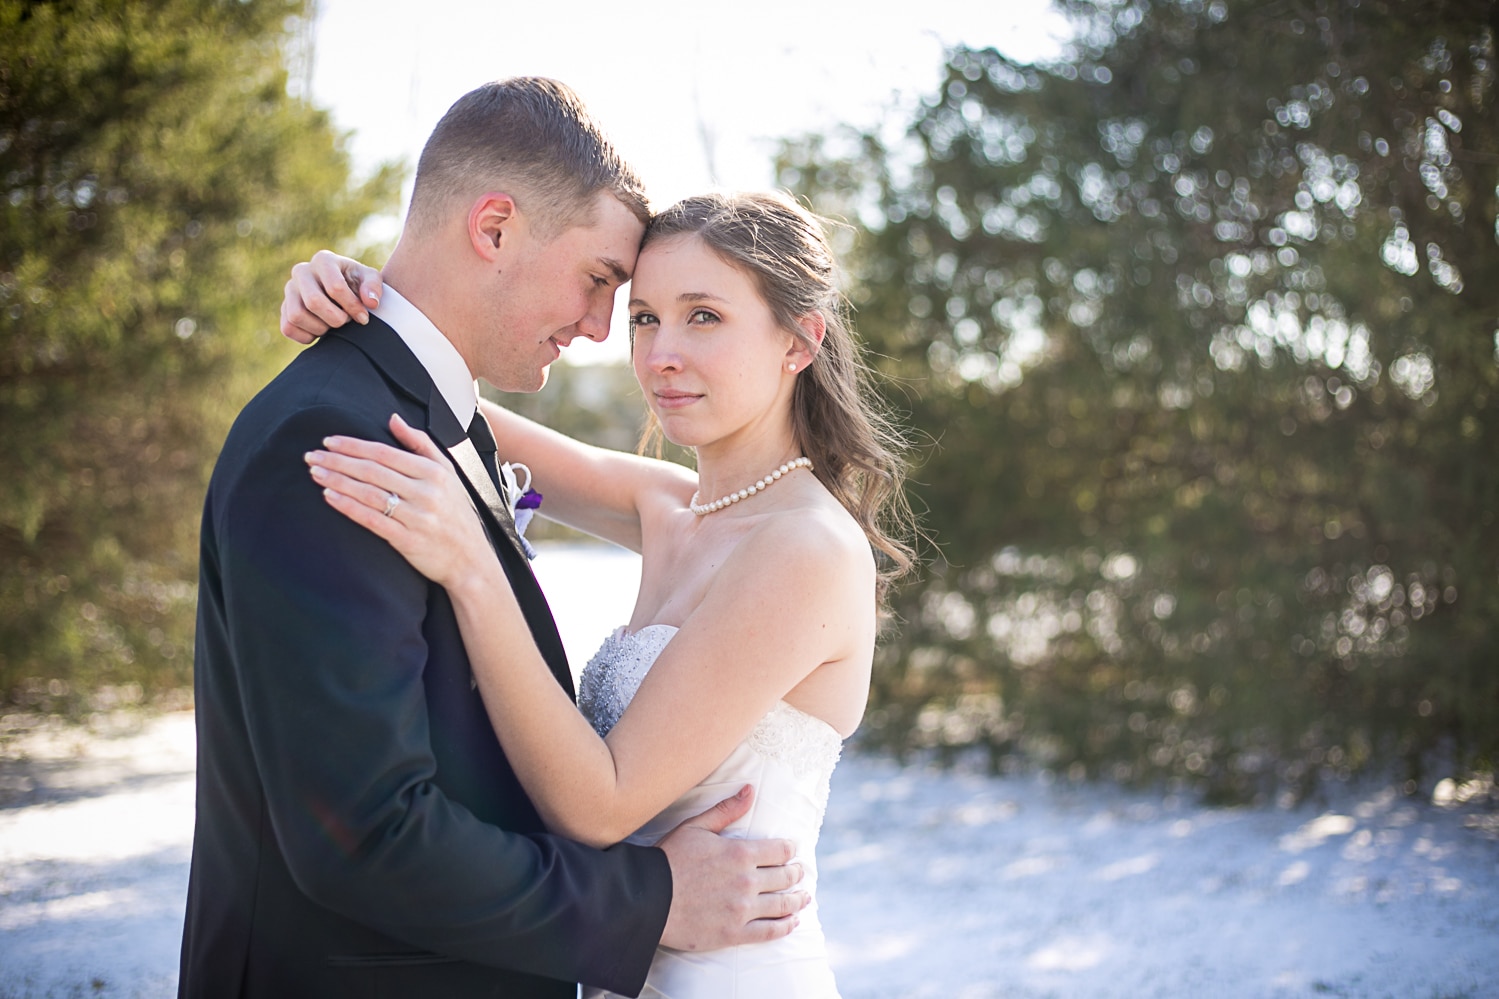 Christian Life Church: Winter wedding in Tennessee